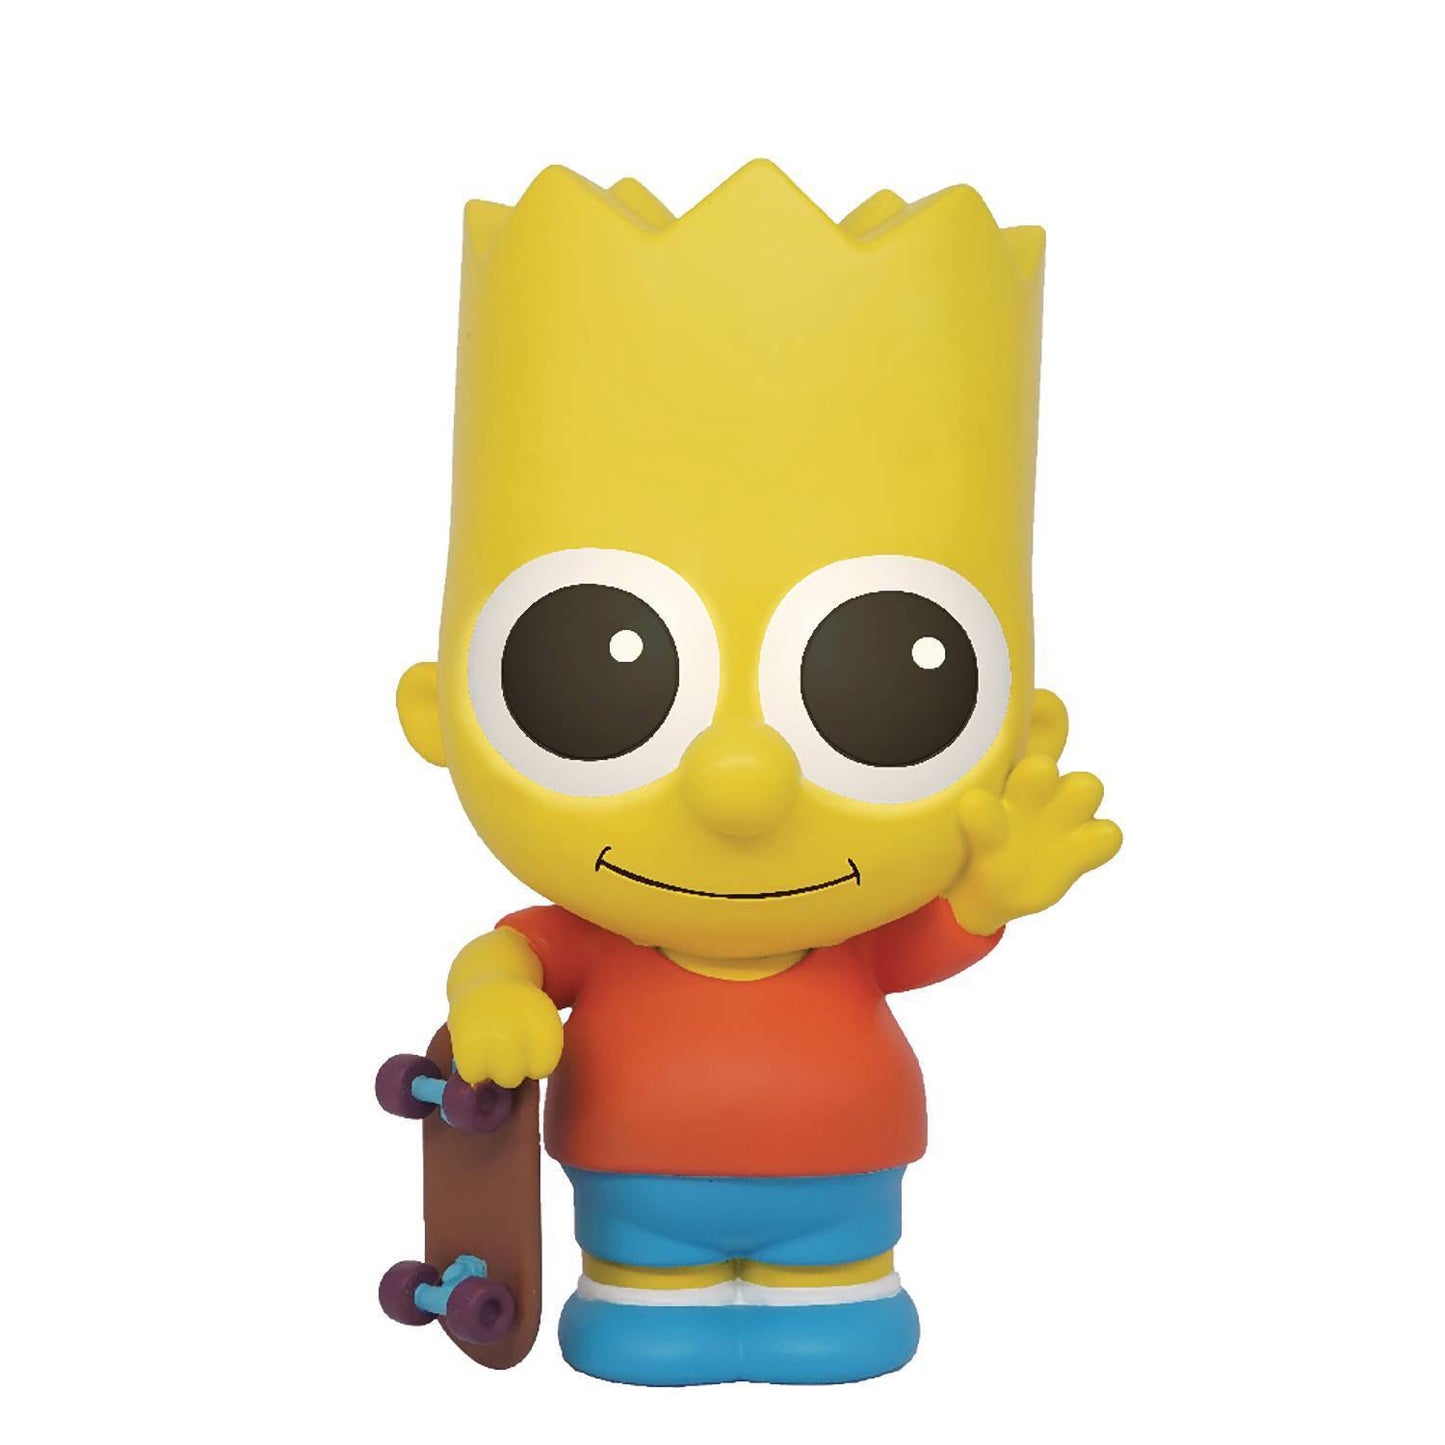 the Simpsons - Bart - Figural PVC Bust Bank